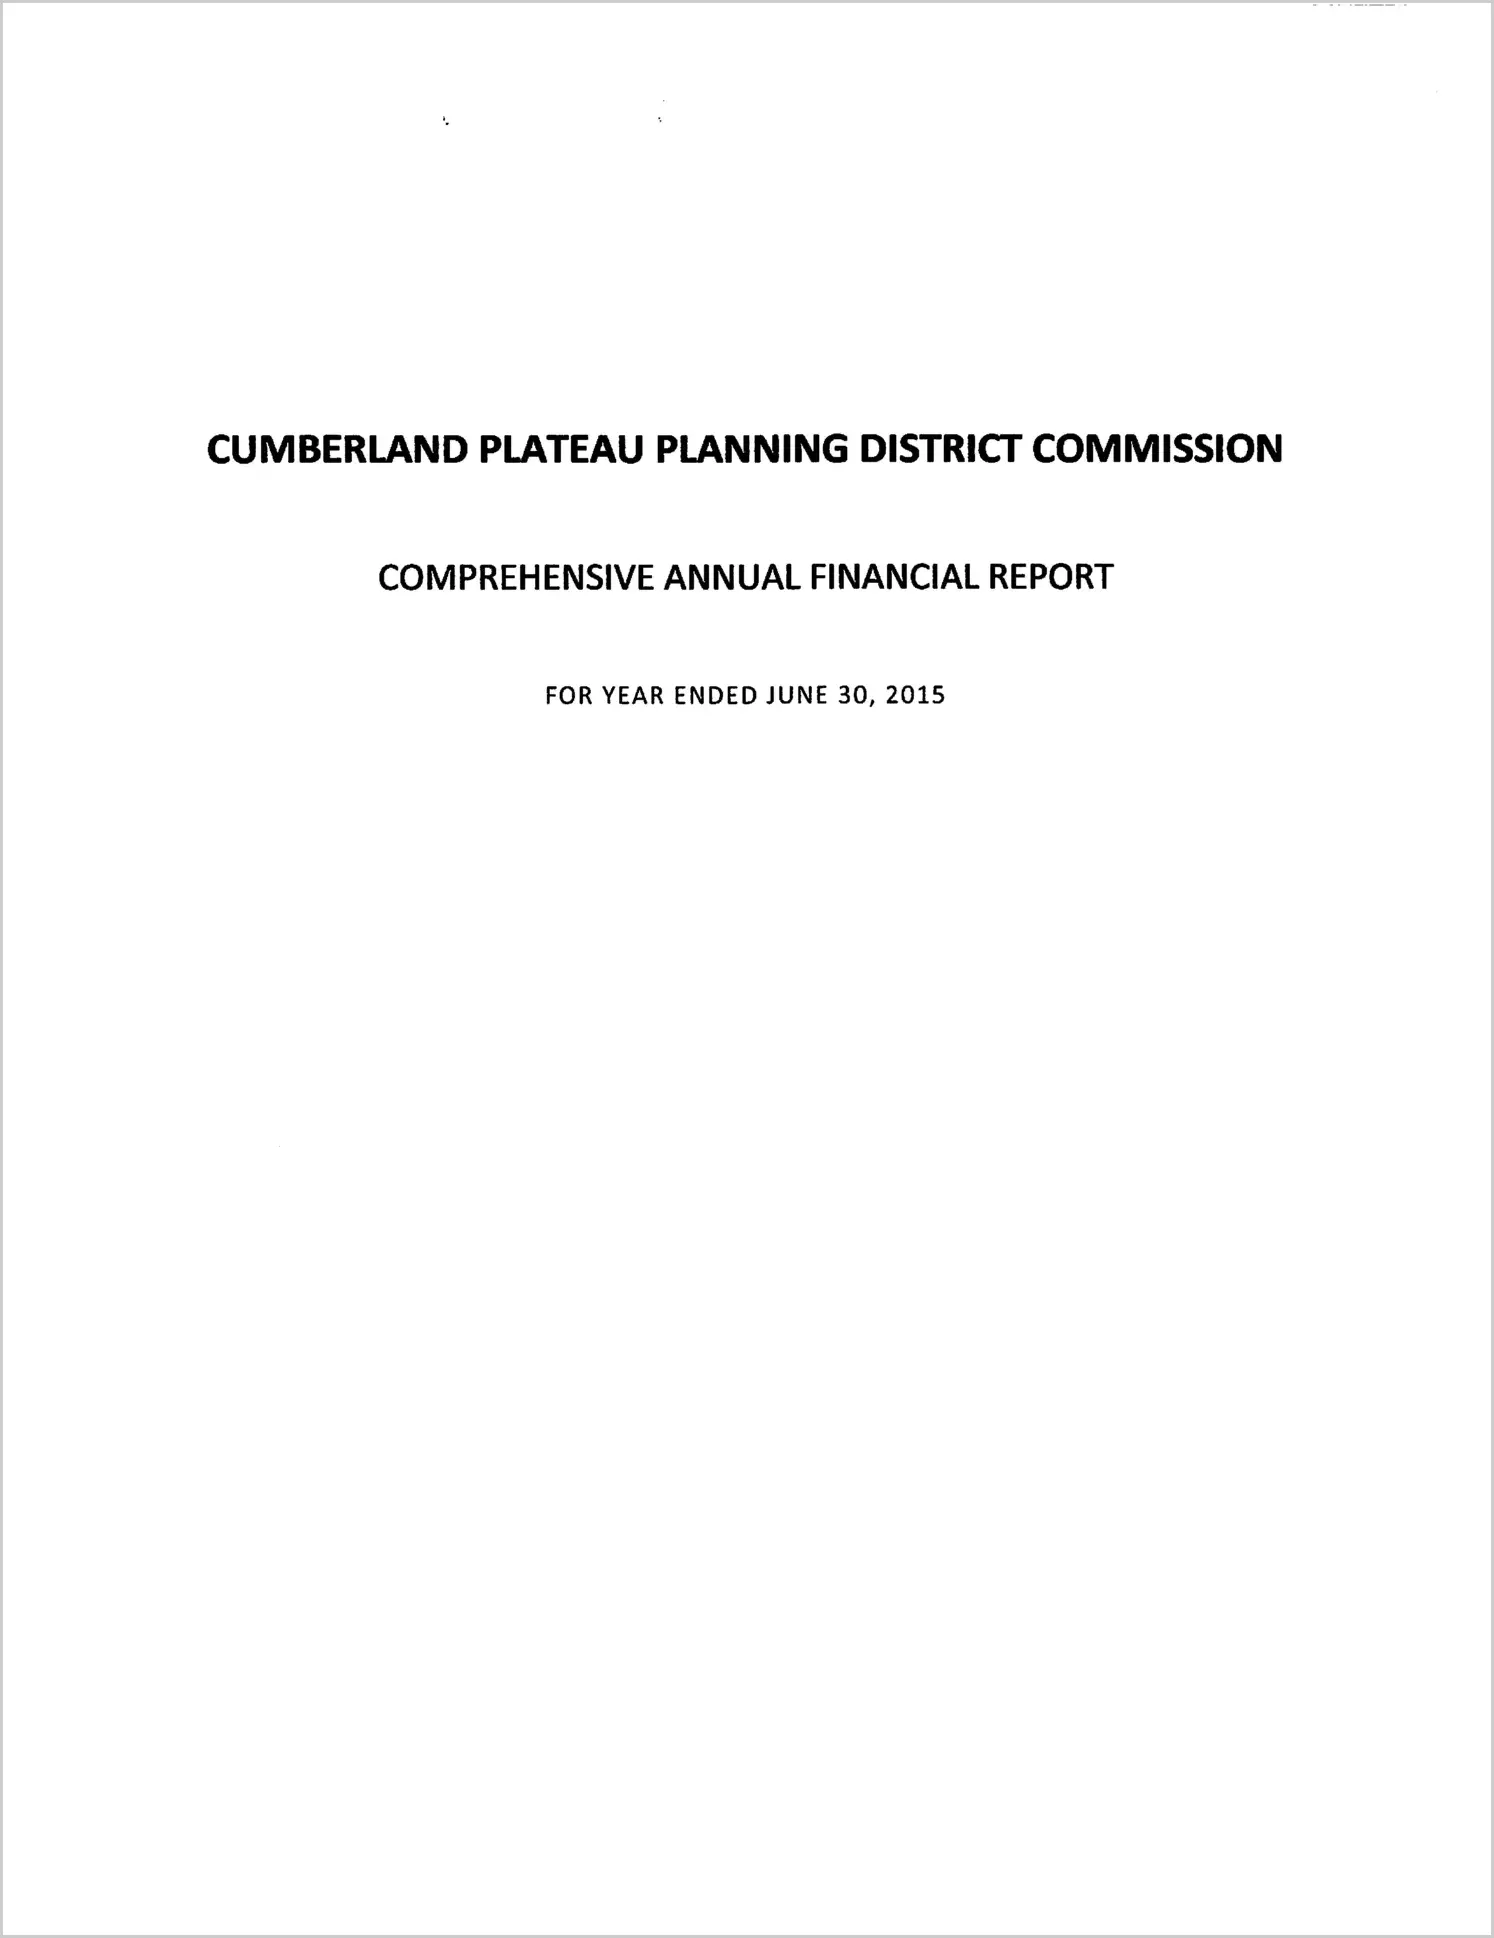 2015 ABC/Other Annual Financial Report  for Cumberland Plateau Planning District Commission